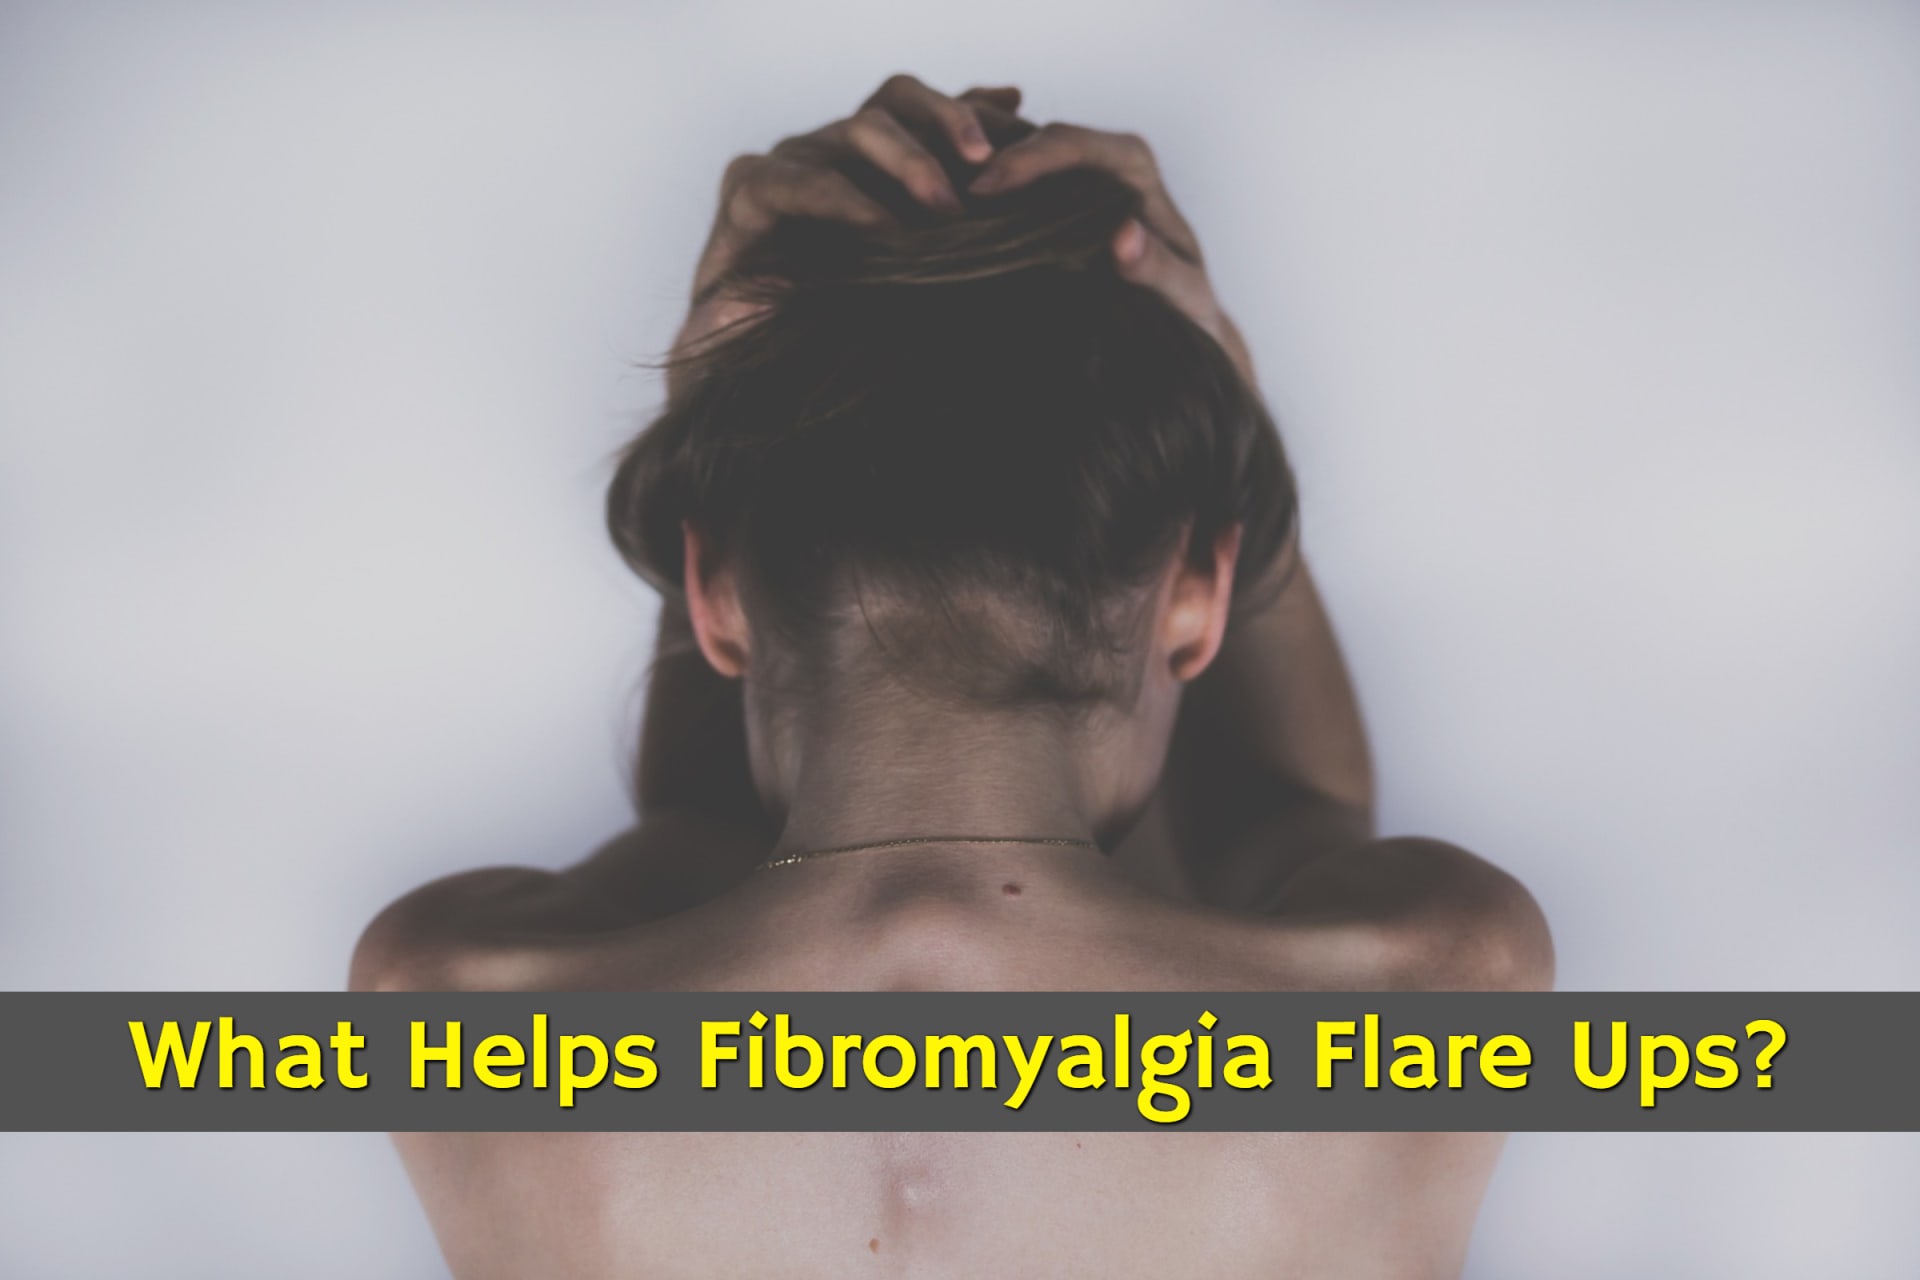 Woman in pain, holding her head experiencing fibromyalgia flare ups